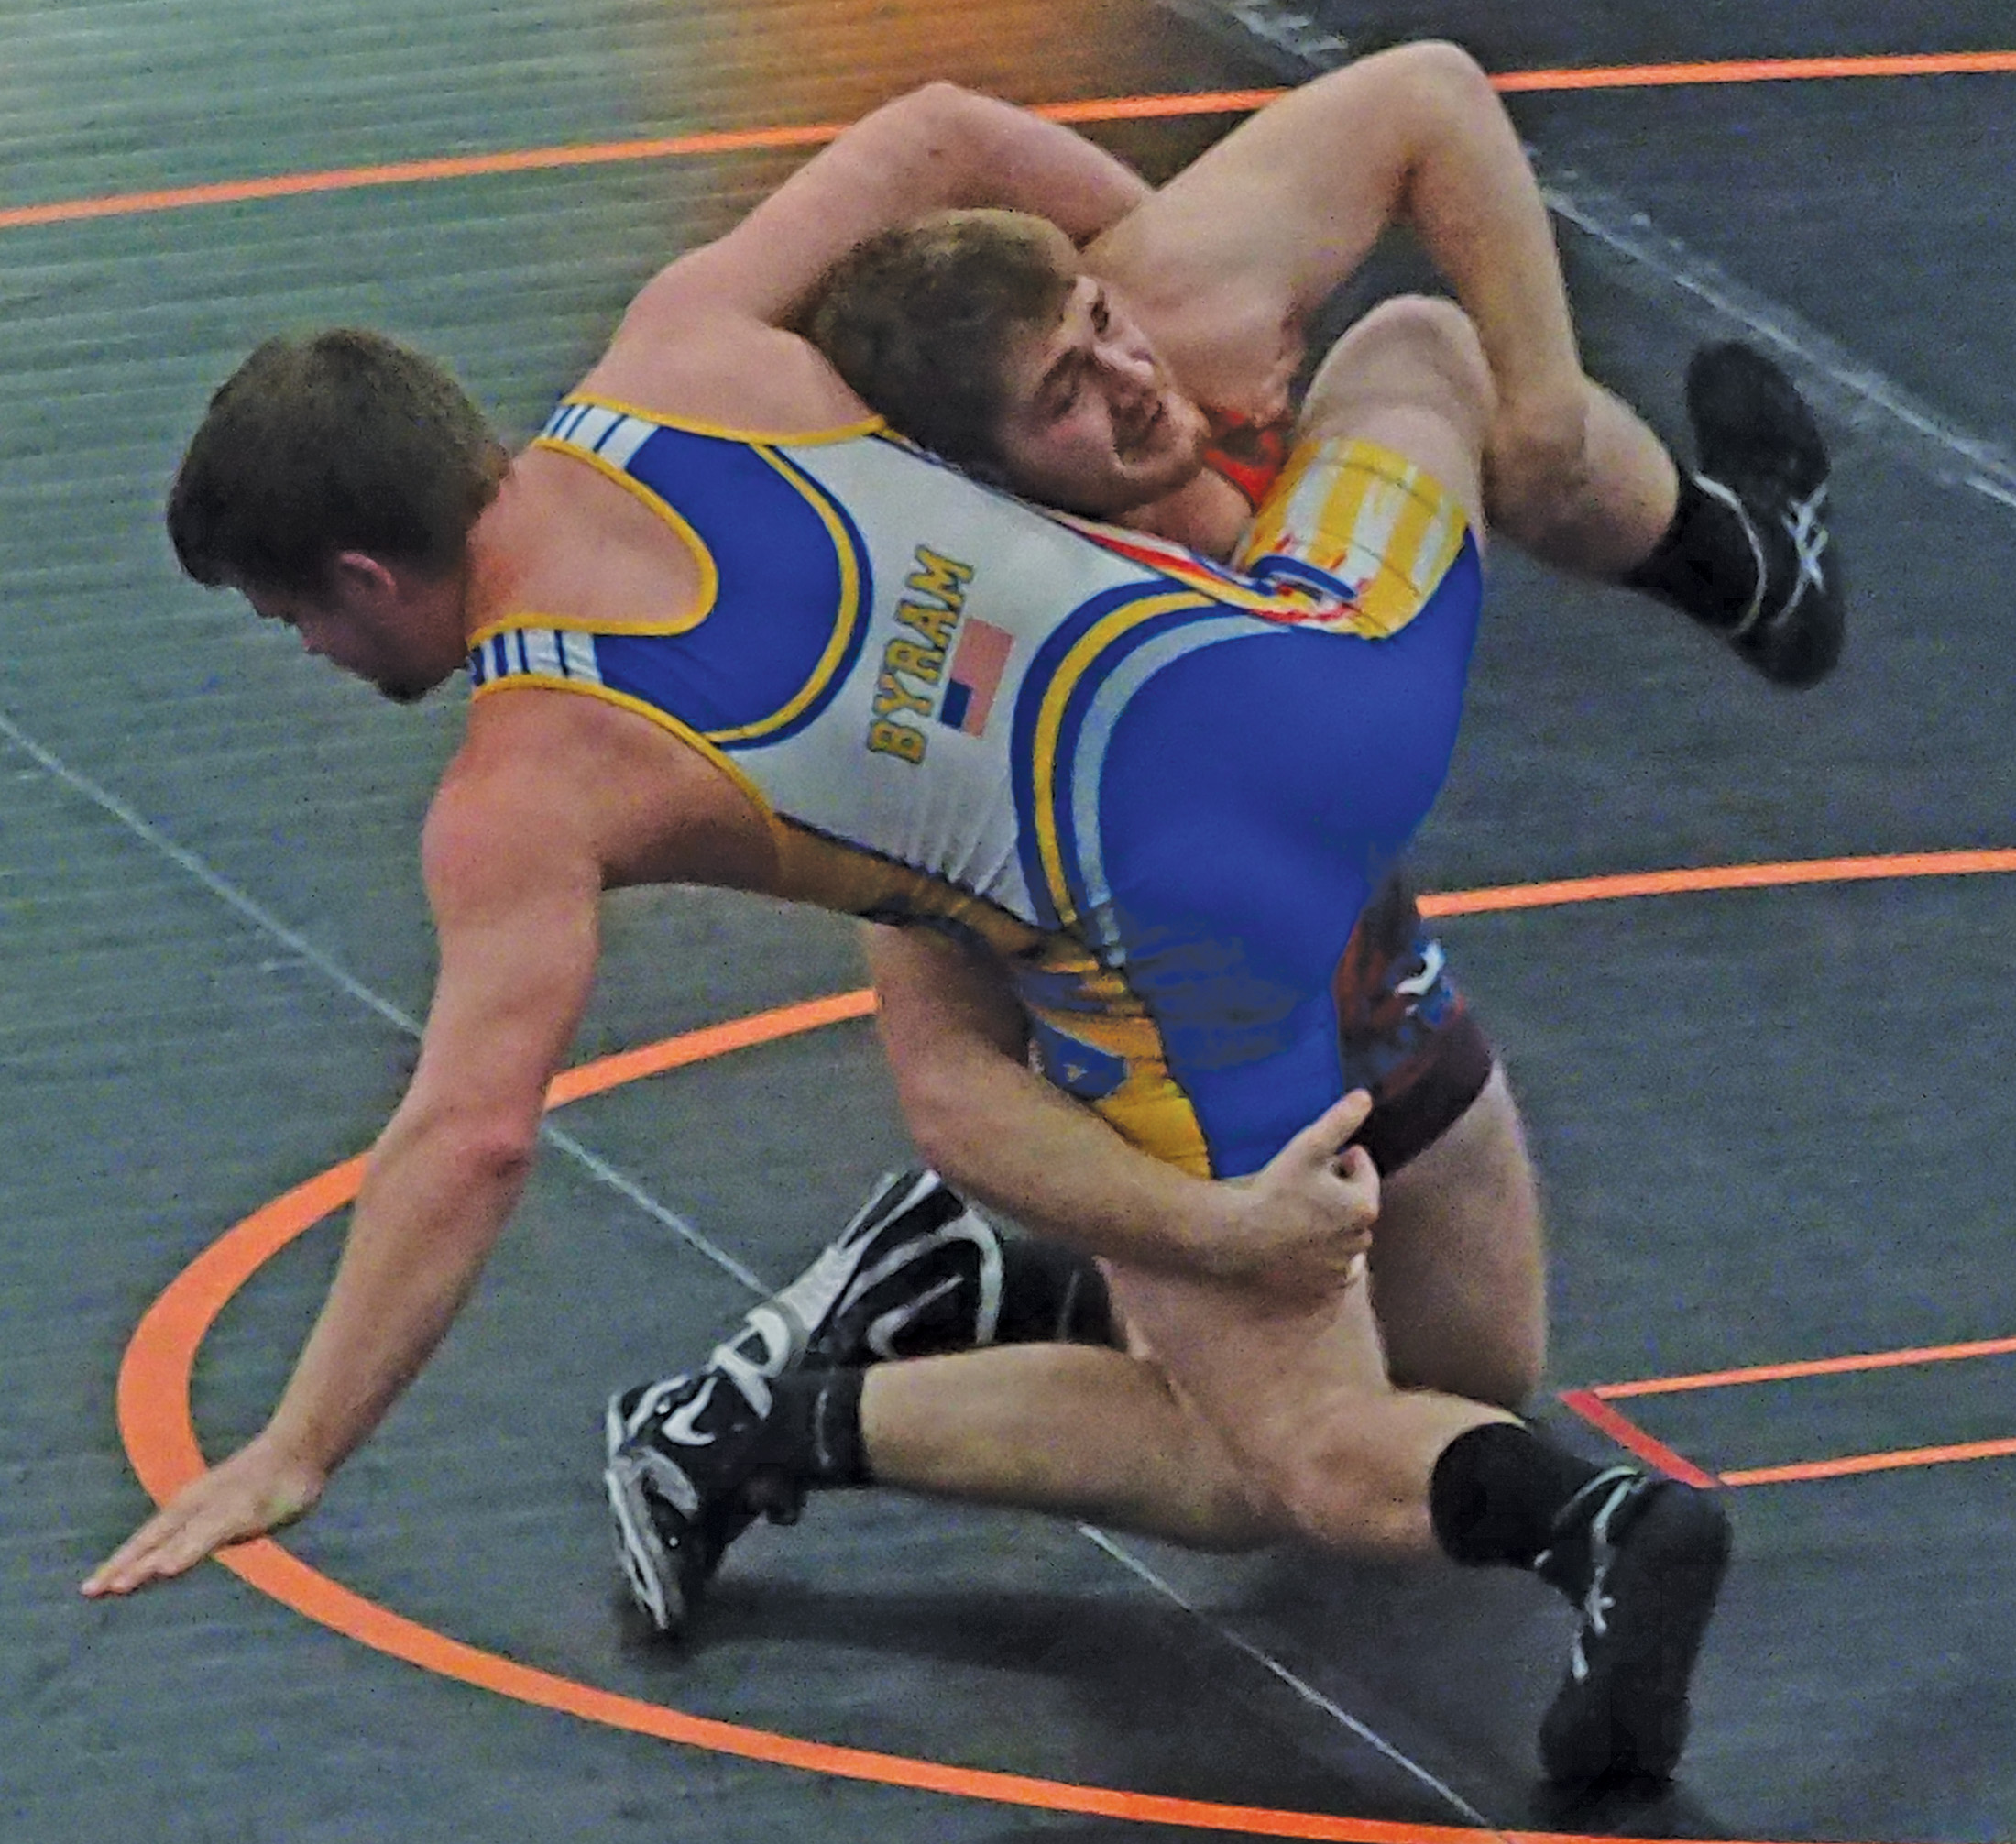 Charles City hosts 39th-annual North/South All-Star Wrestling Meet